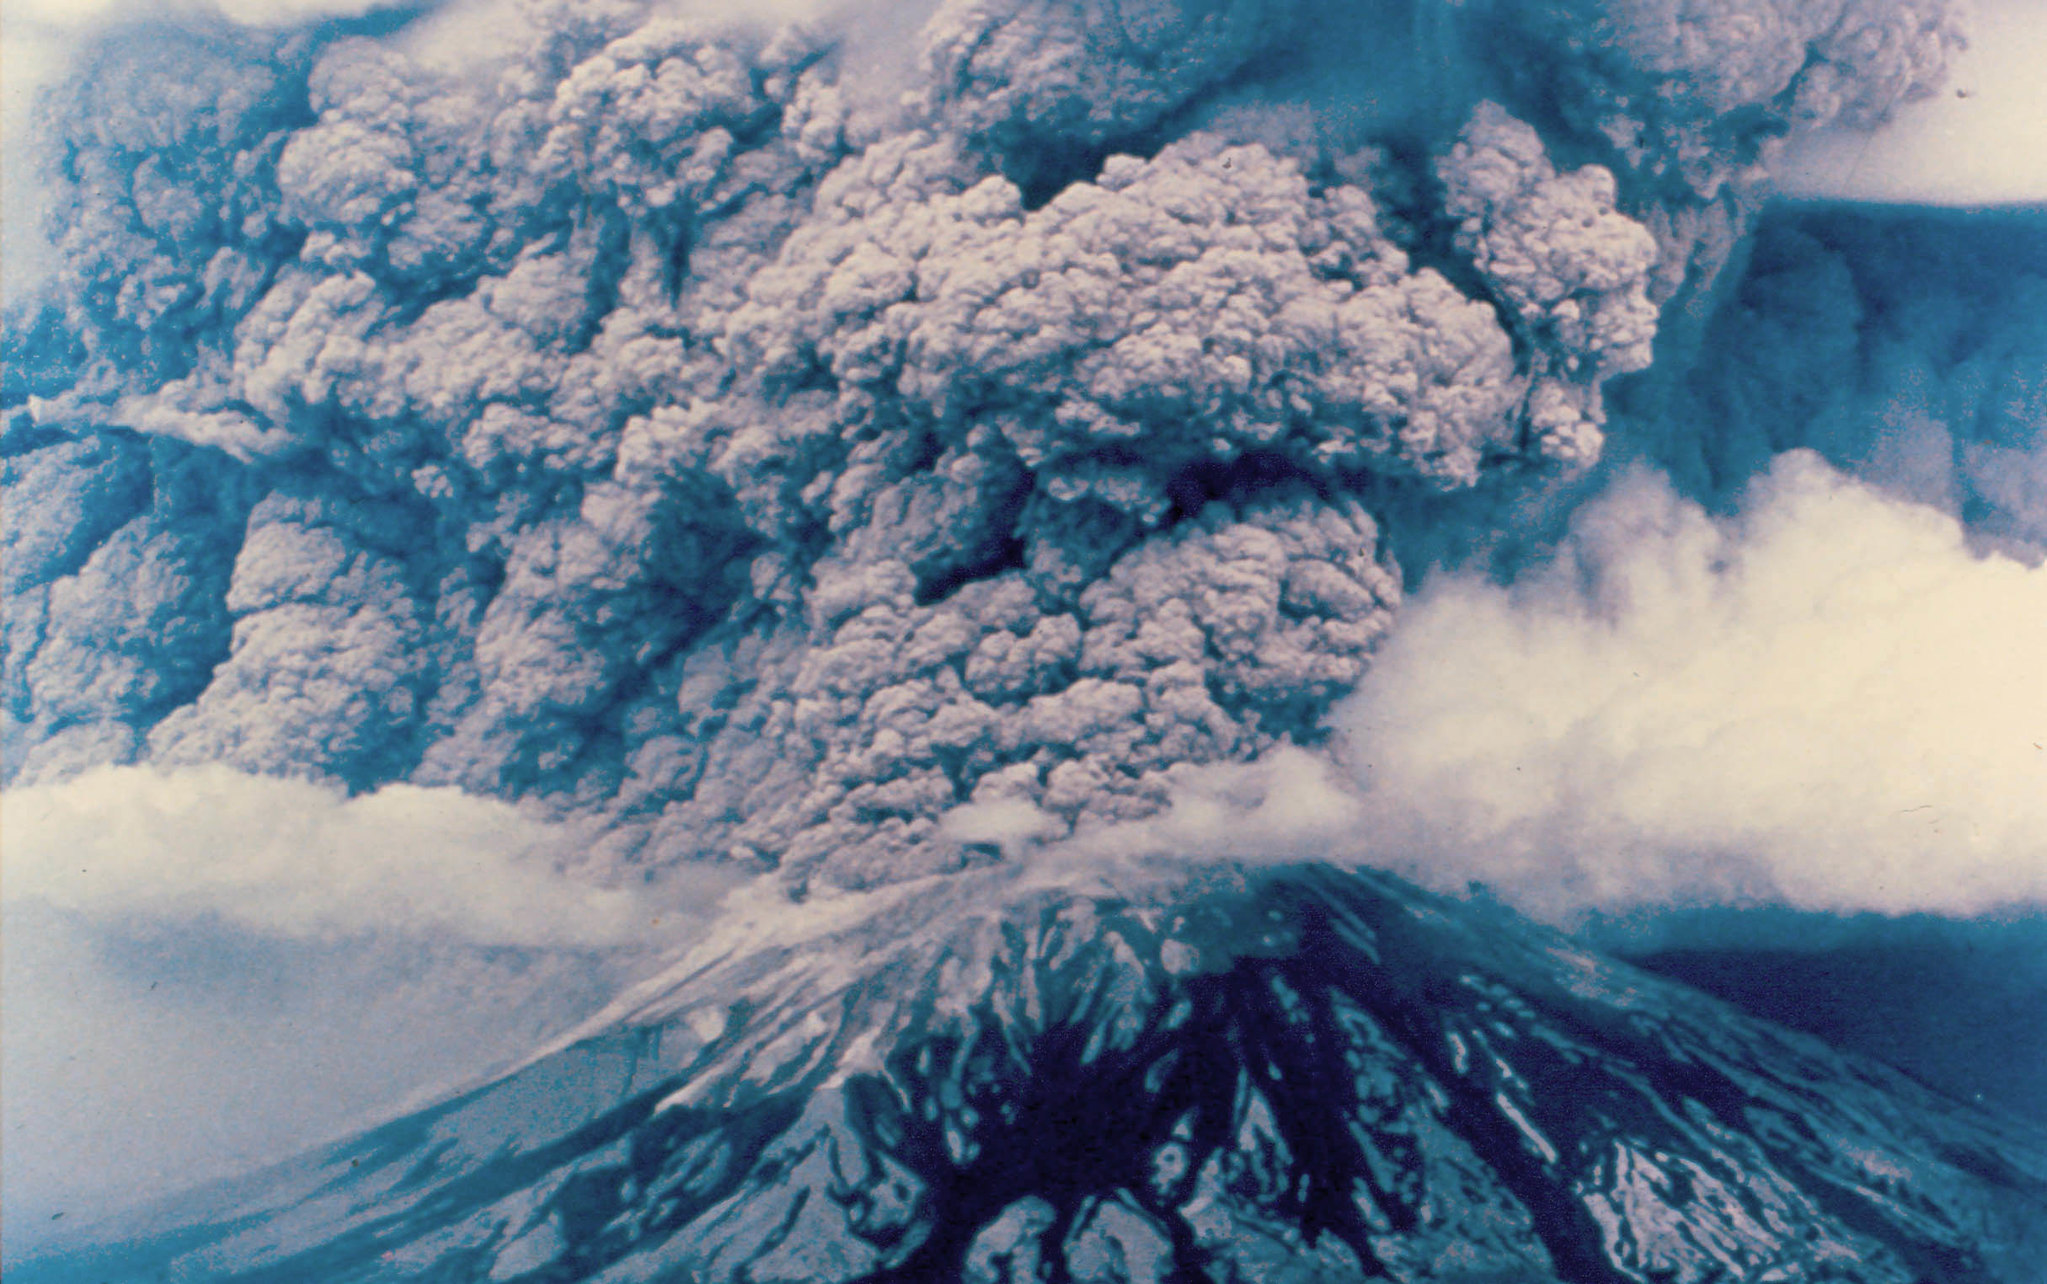 Photograph showing the explosive eruption of Mount St. Helens in 1980. Smoke spews from the mountaintop.